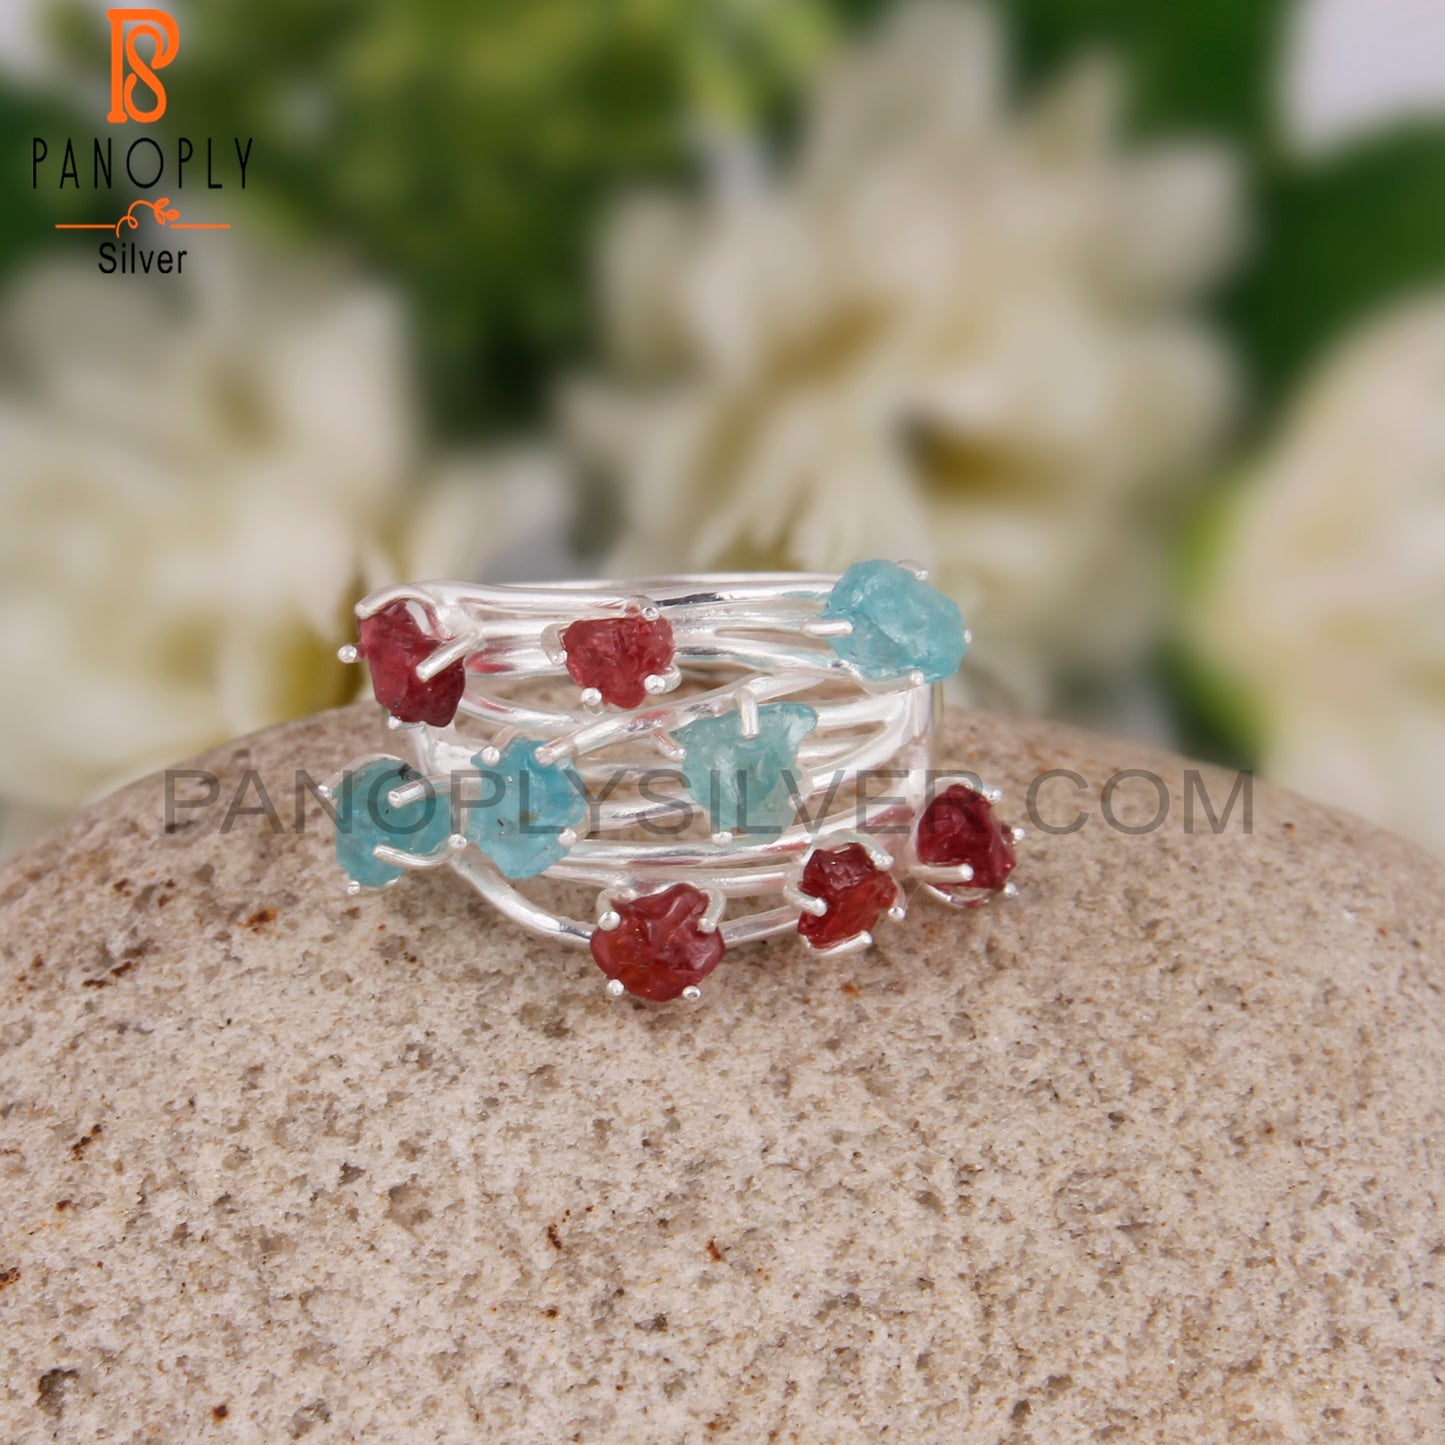 Apatite & Spinel Ruby 925 Sterling Silver Lightweight Ring